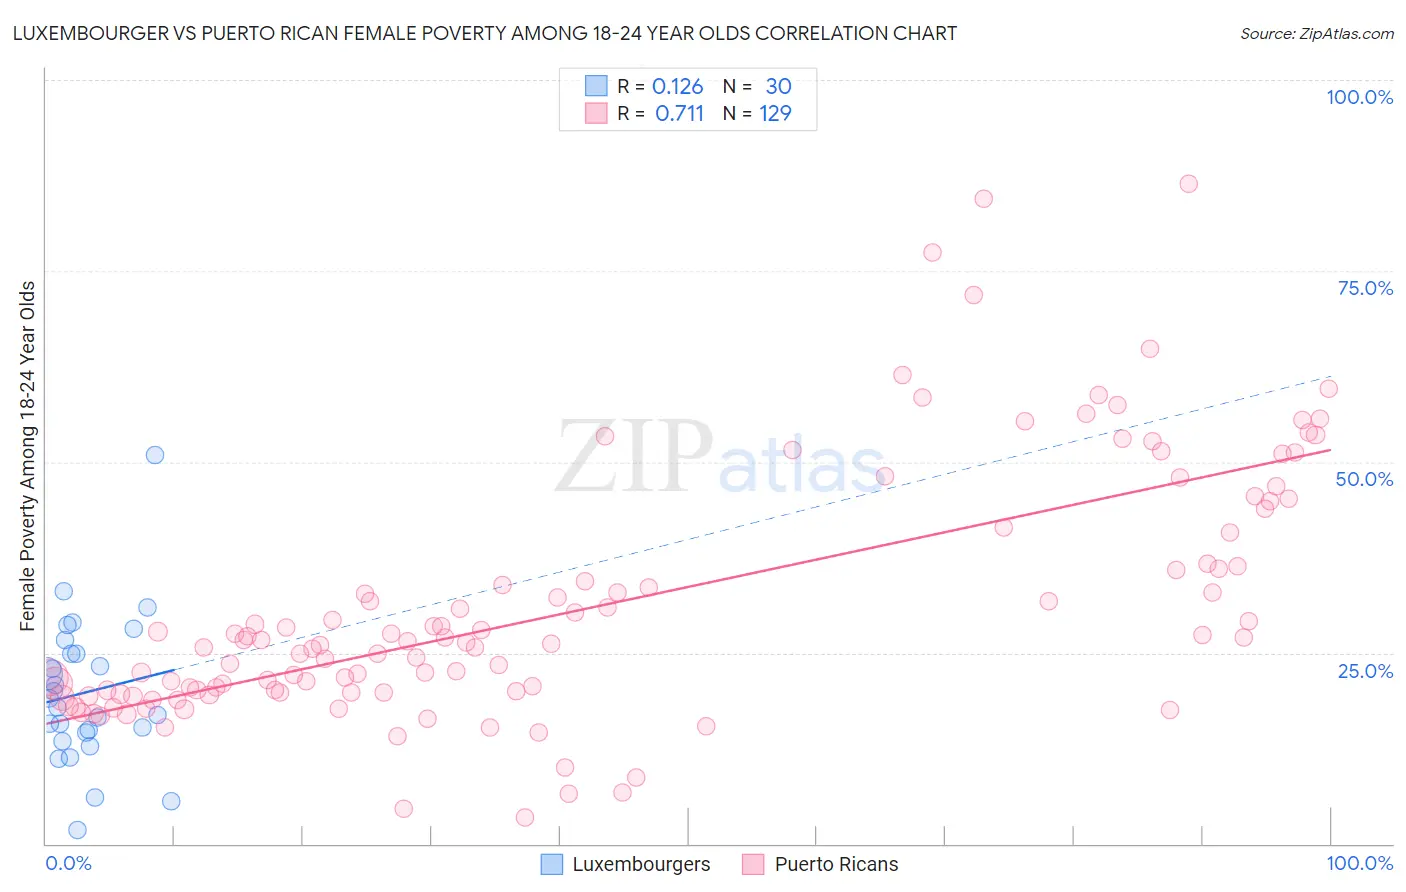 Luxembourger vs Puerto Rican Female Poverty Among 18-24 Year Olds